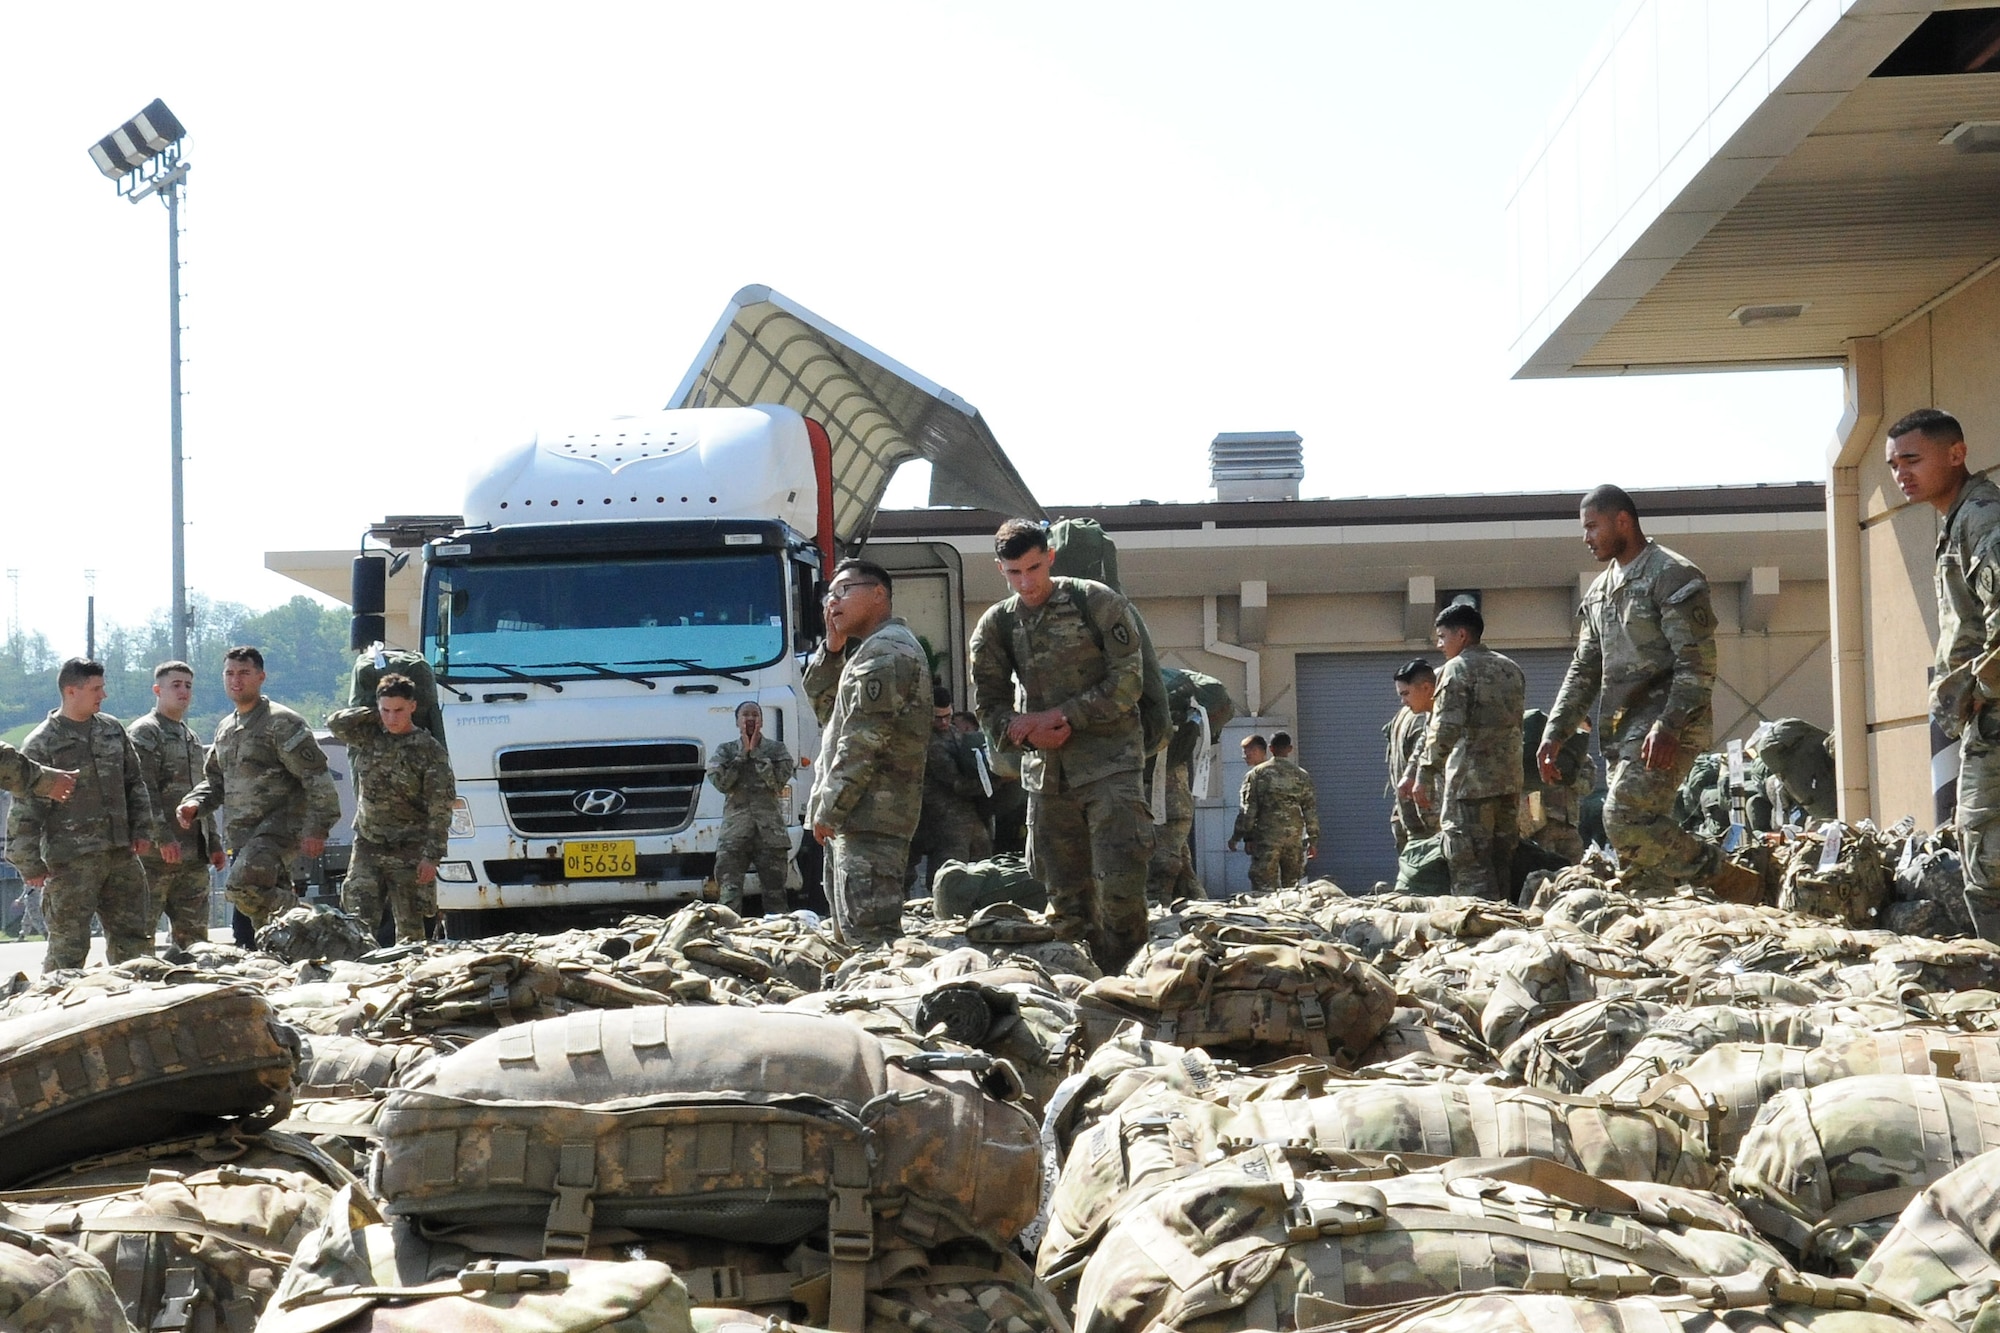 U.S. Army Soldiers with the 1st Battalion, 21st Infantry, 2nd Brigade, 25th Infantry Division unload bags from a truck before loading them onto a Korean Air Boeing 777 aircraft at Osan Air Base, Republic of Korea May 4, 2018. More than 500 U.S. Soldiers from the 25th Infantry Division were transported from Osan Air Base to the Philippines to support exercise Balikatan in support of the Mutual Airlift Support Agreement, which was exercised at Osan Air Base for the first time. (U.S. Air Force photo by Tech. Sgt. Ashley Tyler)